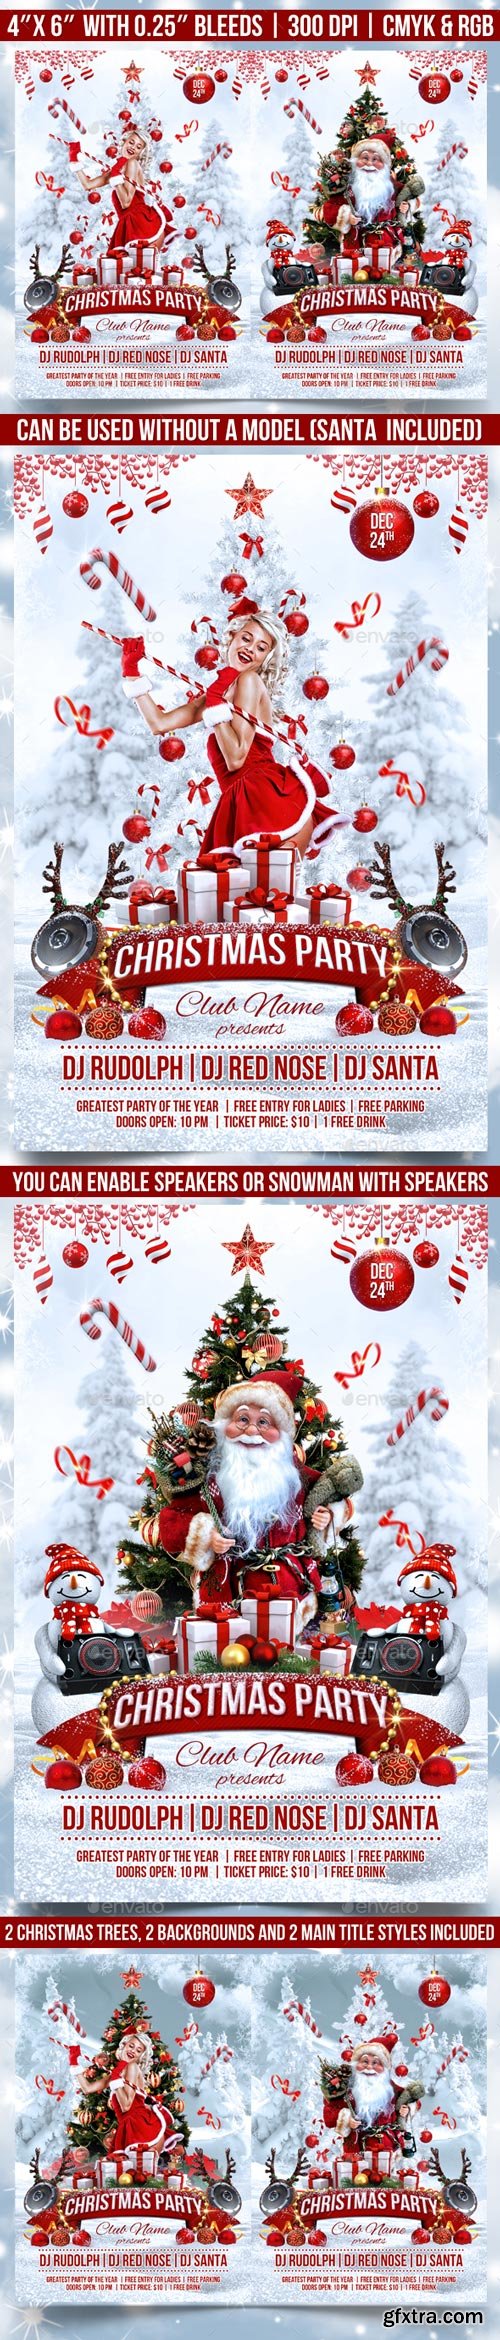 GraphicRiver - Christmas Party Flyer - 18616879